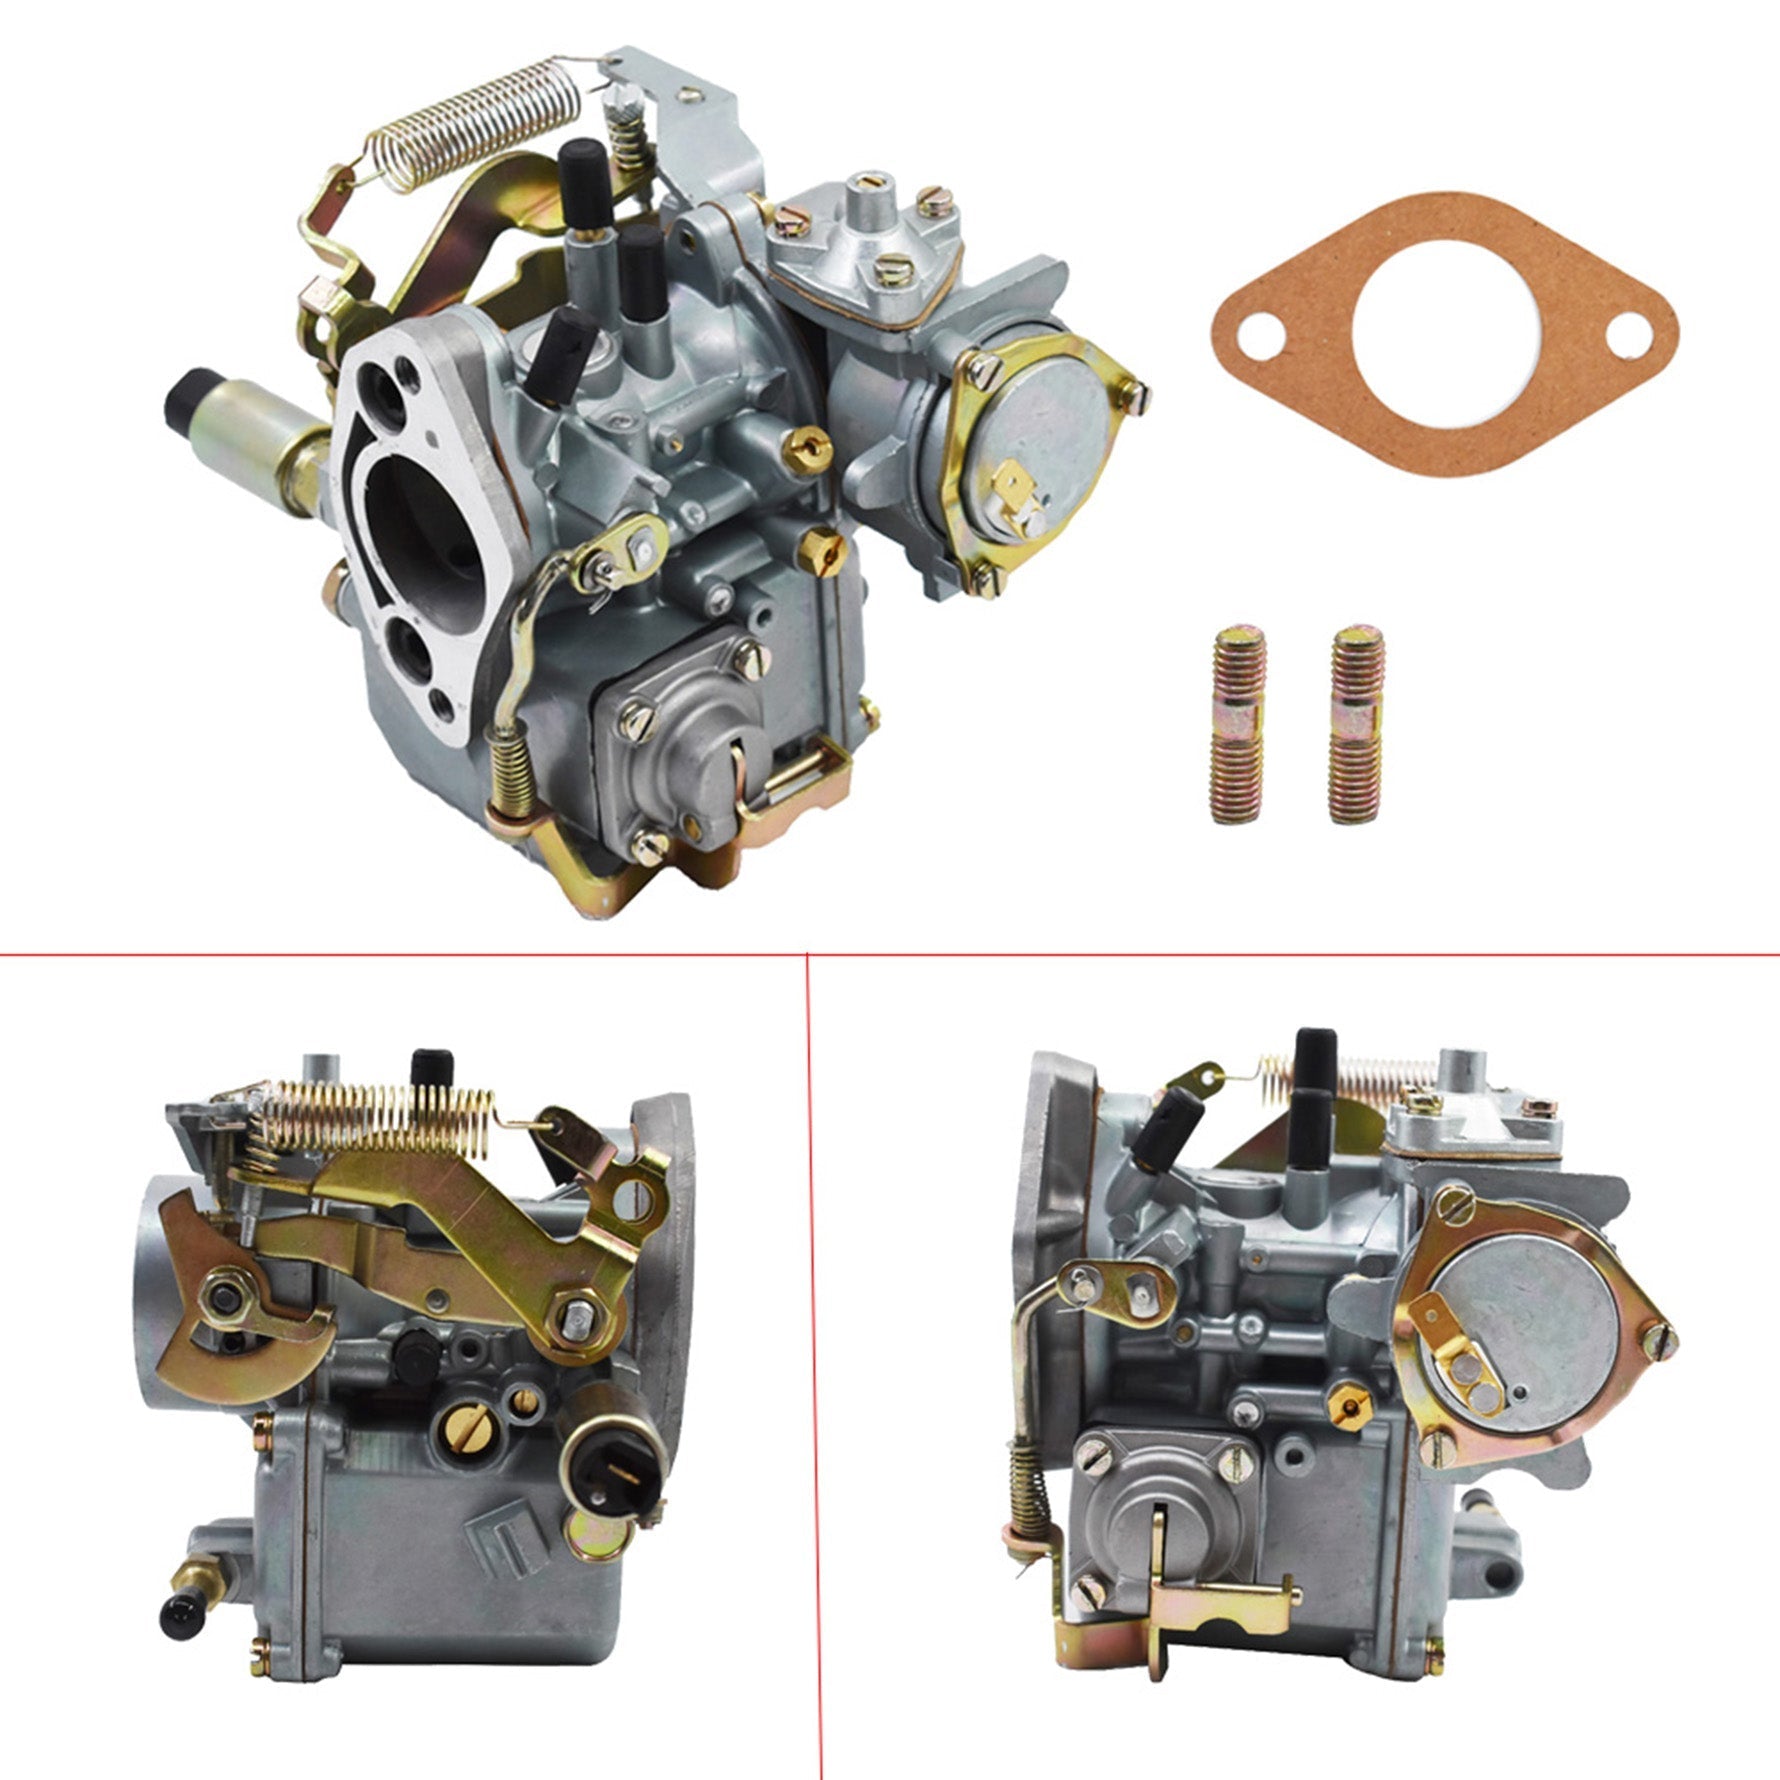 Carburetor For Vw Beetle 30/31 Pict-3 Type 1&2 Bug Bus Ghia 113129029a